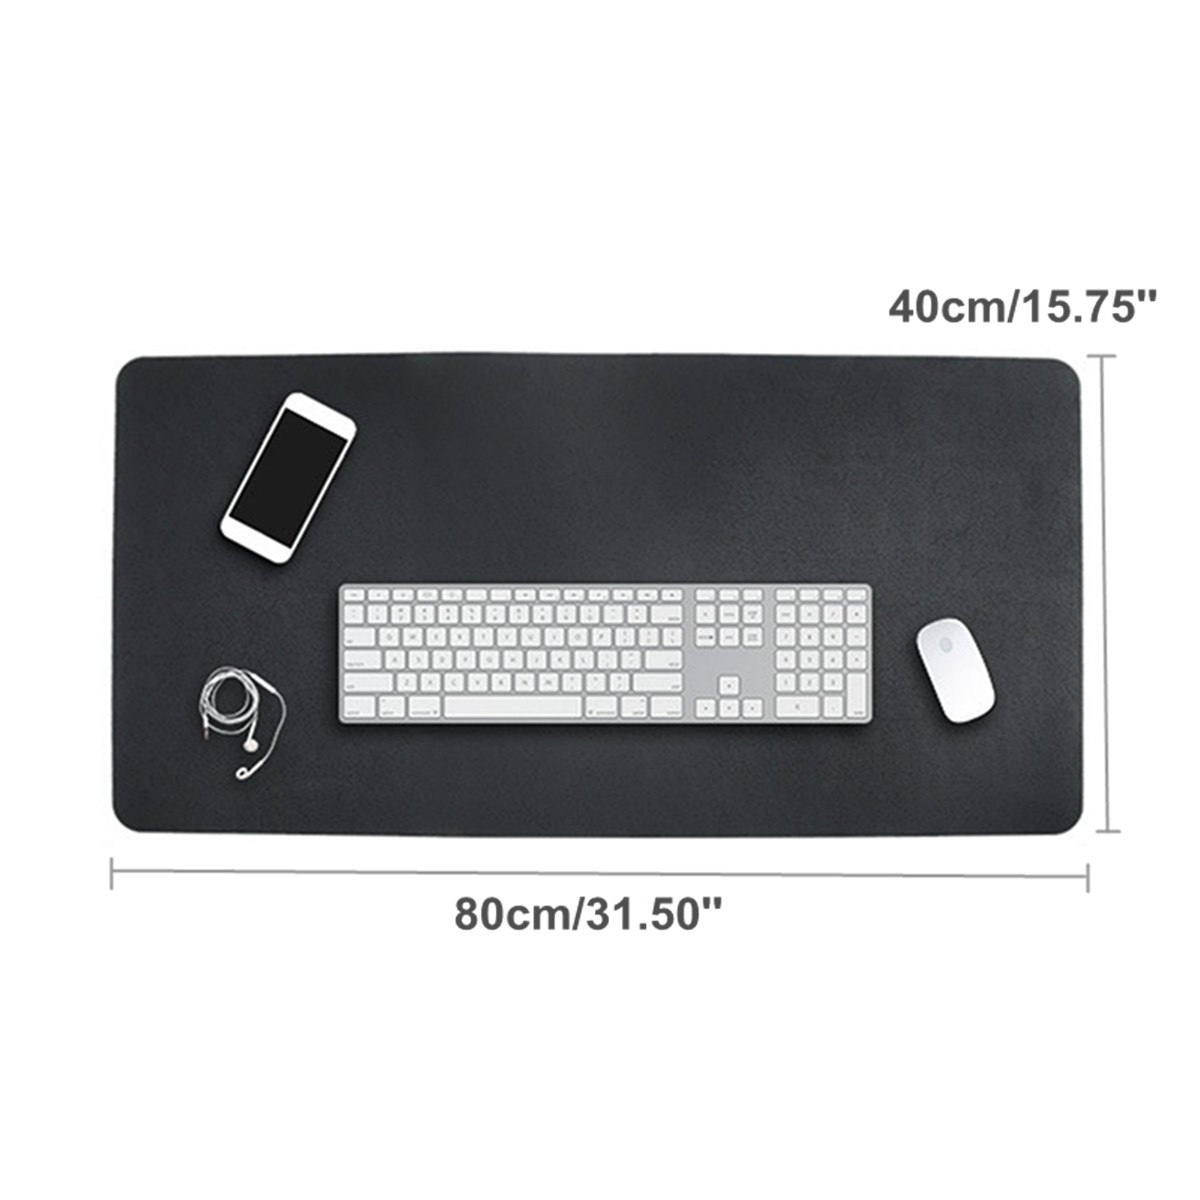 80x40cm Both Sides Two Colors Extended PU leather Mouse Pad Mat Large Office Gaming Desk Mat 15